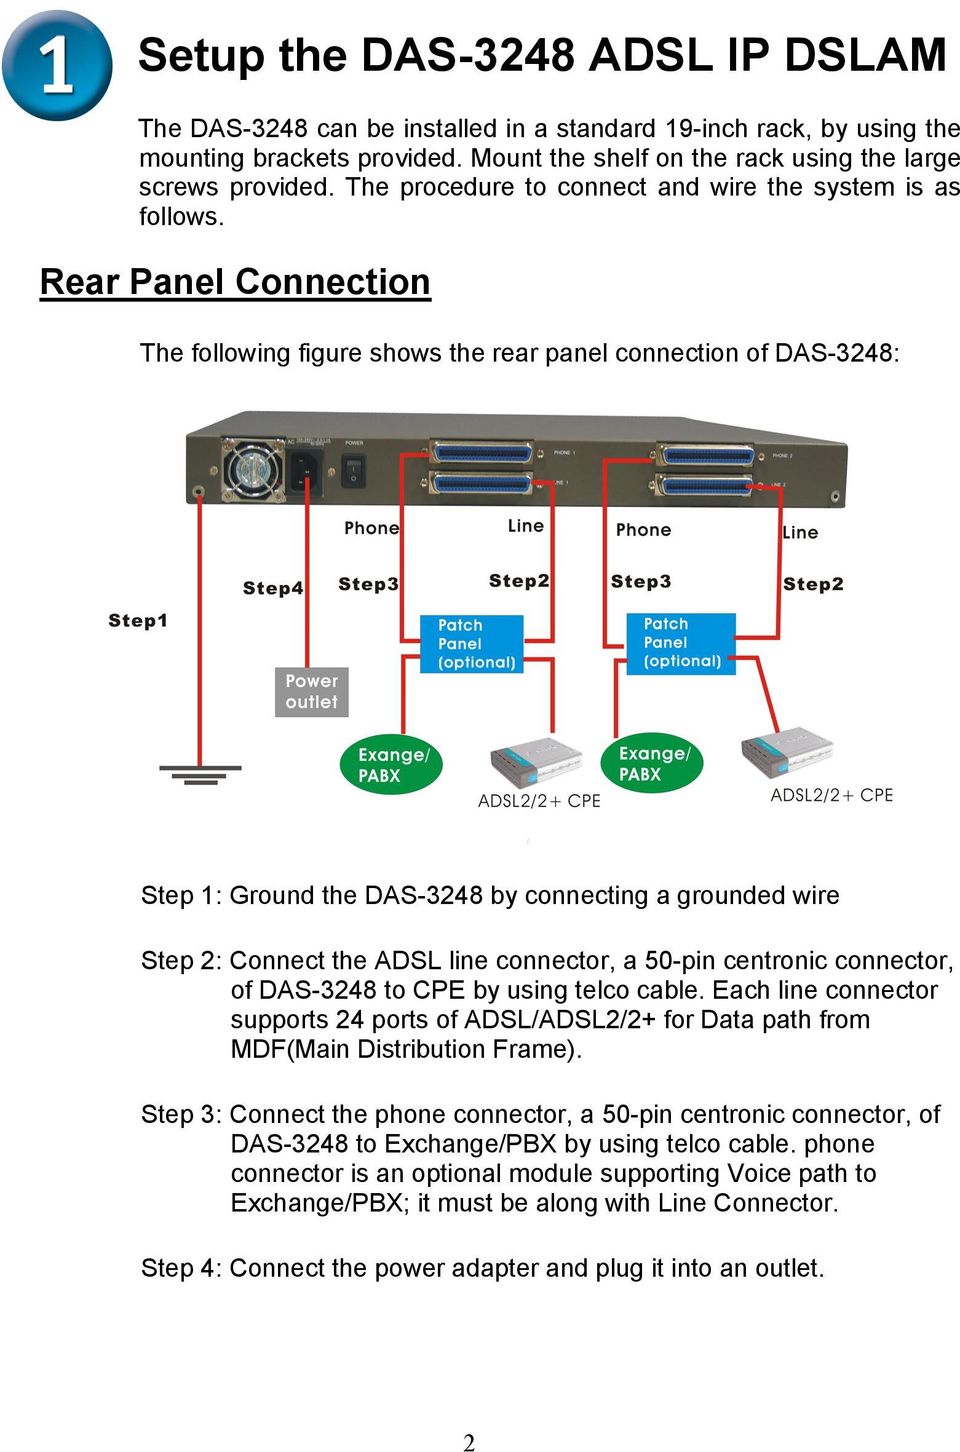 Rear Panel Connection The following figure shows the rear panel connection of DAS-3248: Step 1: Ground the DAS-3248 by connecting a grounded wire Step 2: Connect the ADSL line connector, a 50-pin